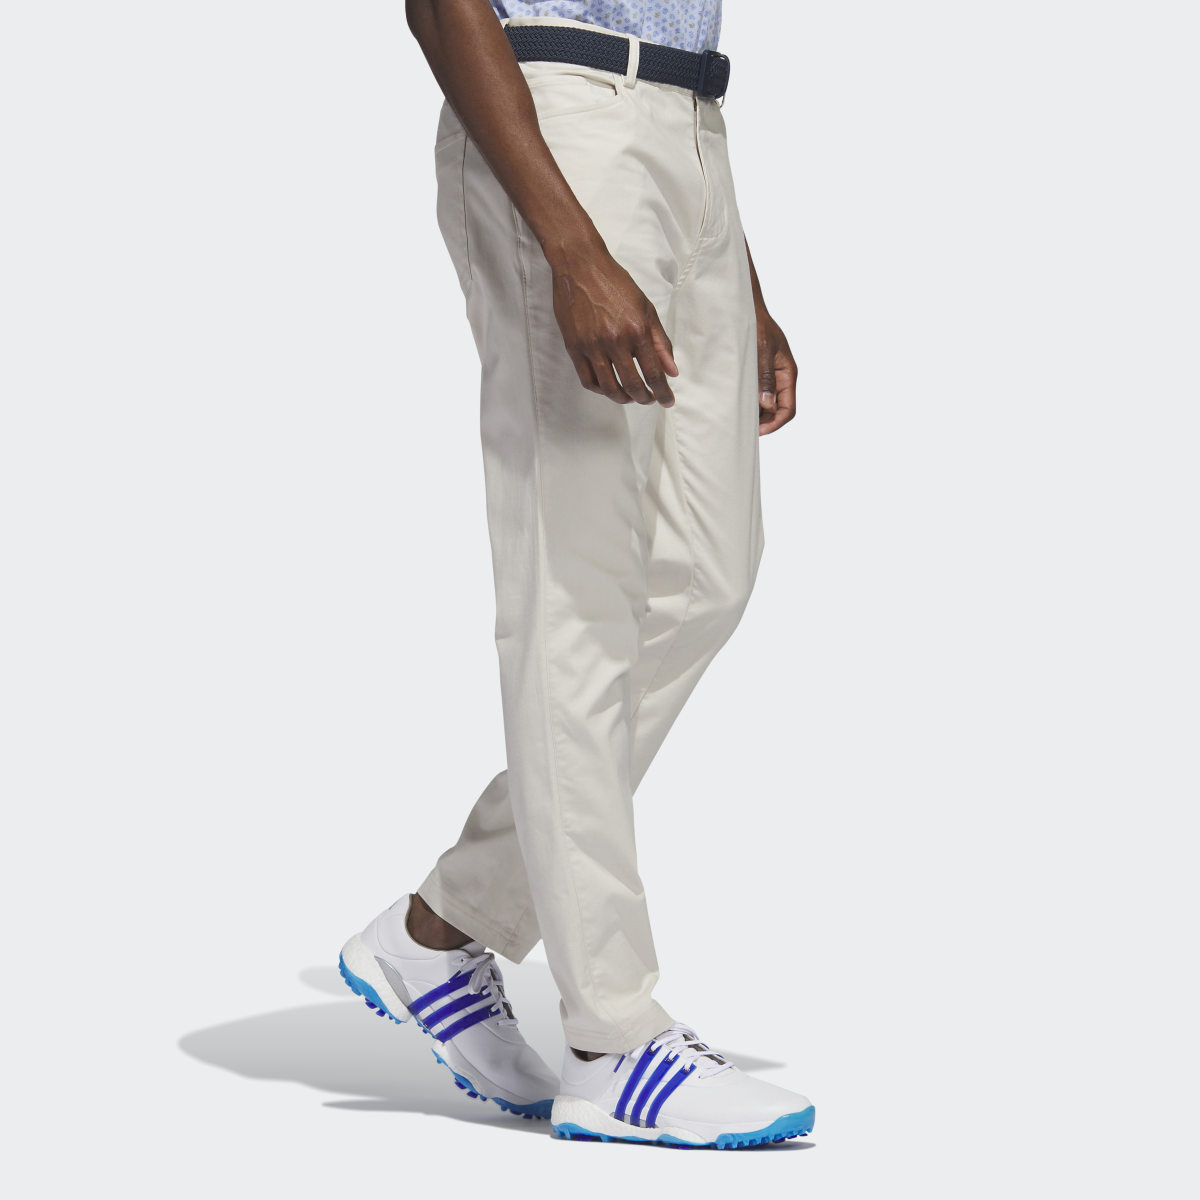 Adidas Go-To 5-Pocket Golf Trousers. 4